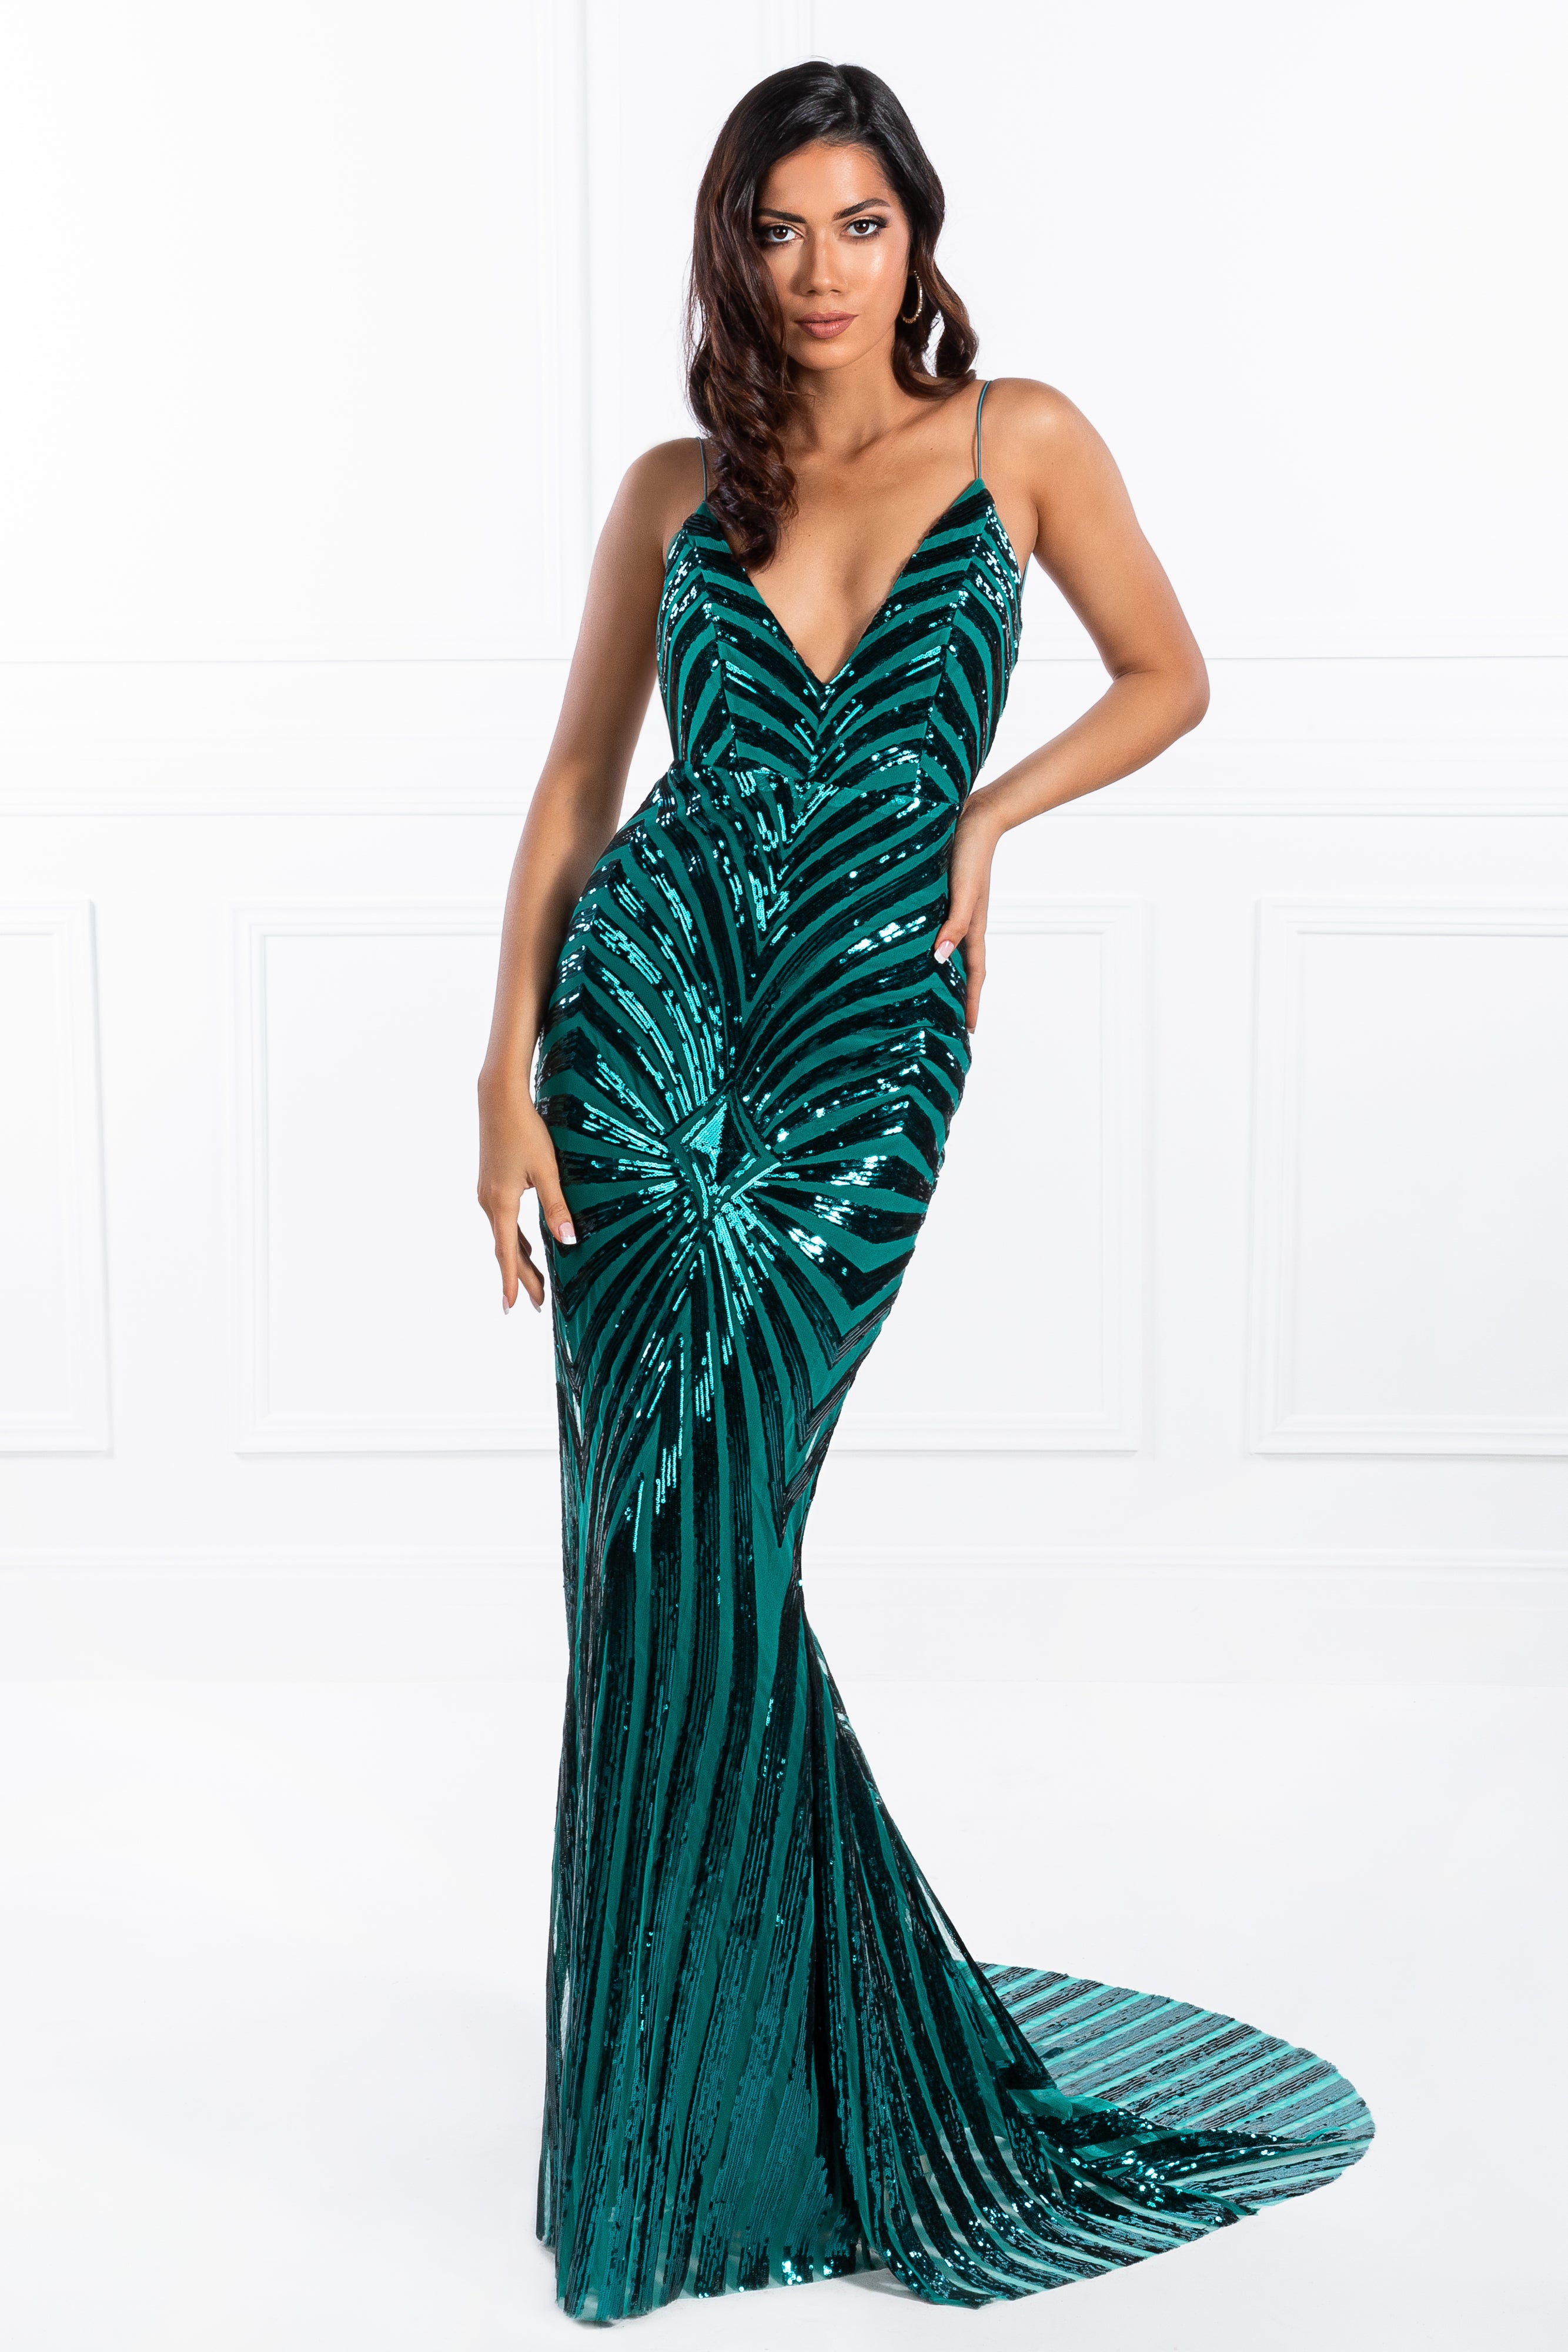 Honey Couture TILDA Emerald Green Low Back Sequin Formal Gown Dress